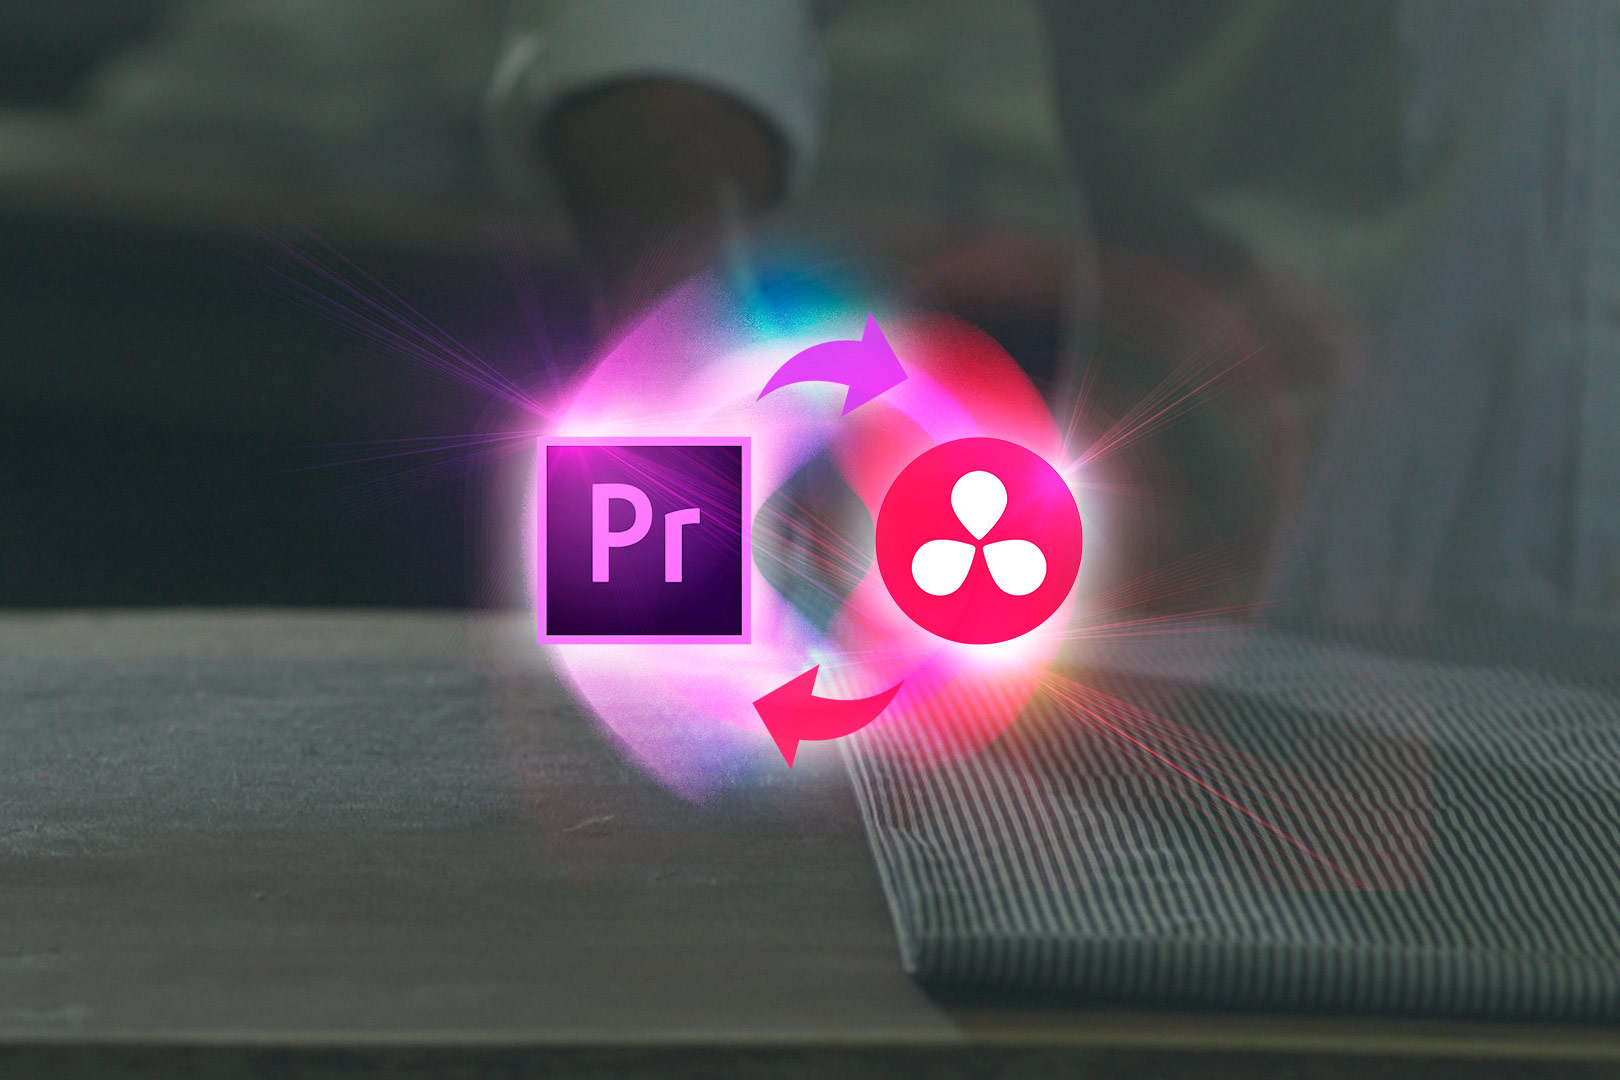 how to use davinci resolve with premiere